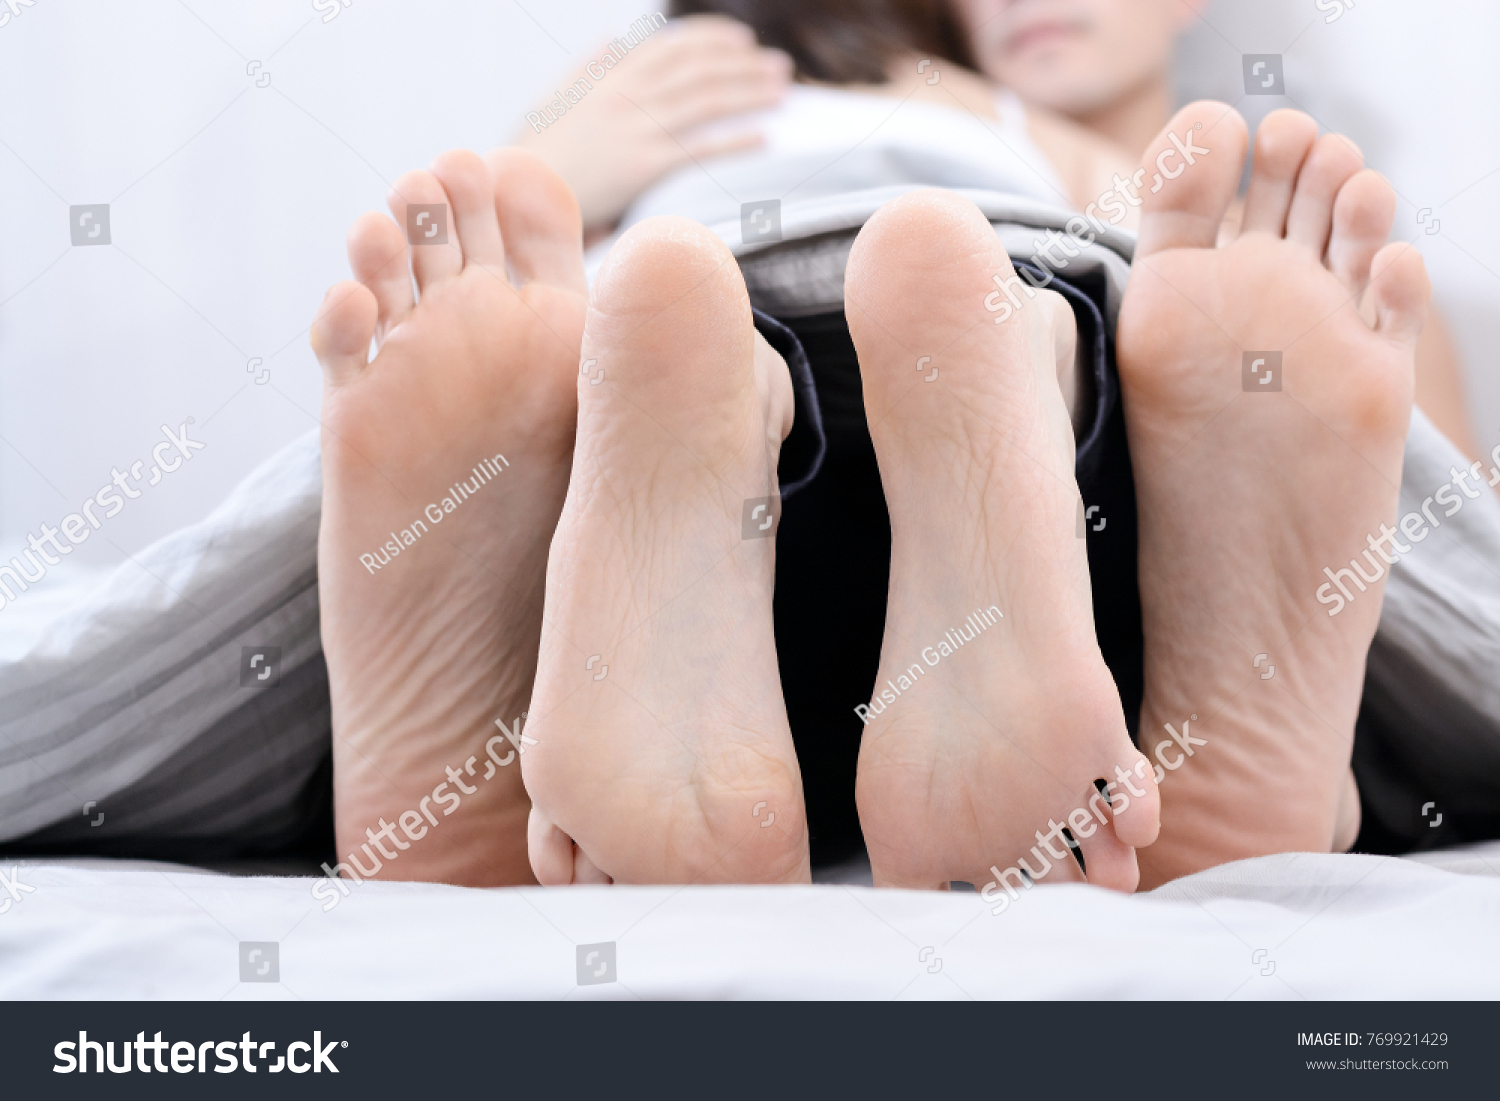 stick on soles for bare feet